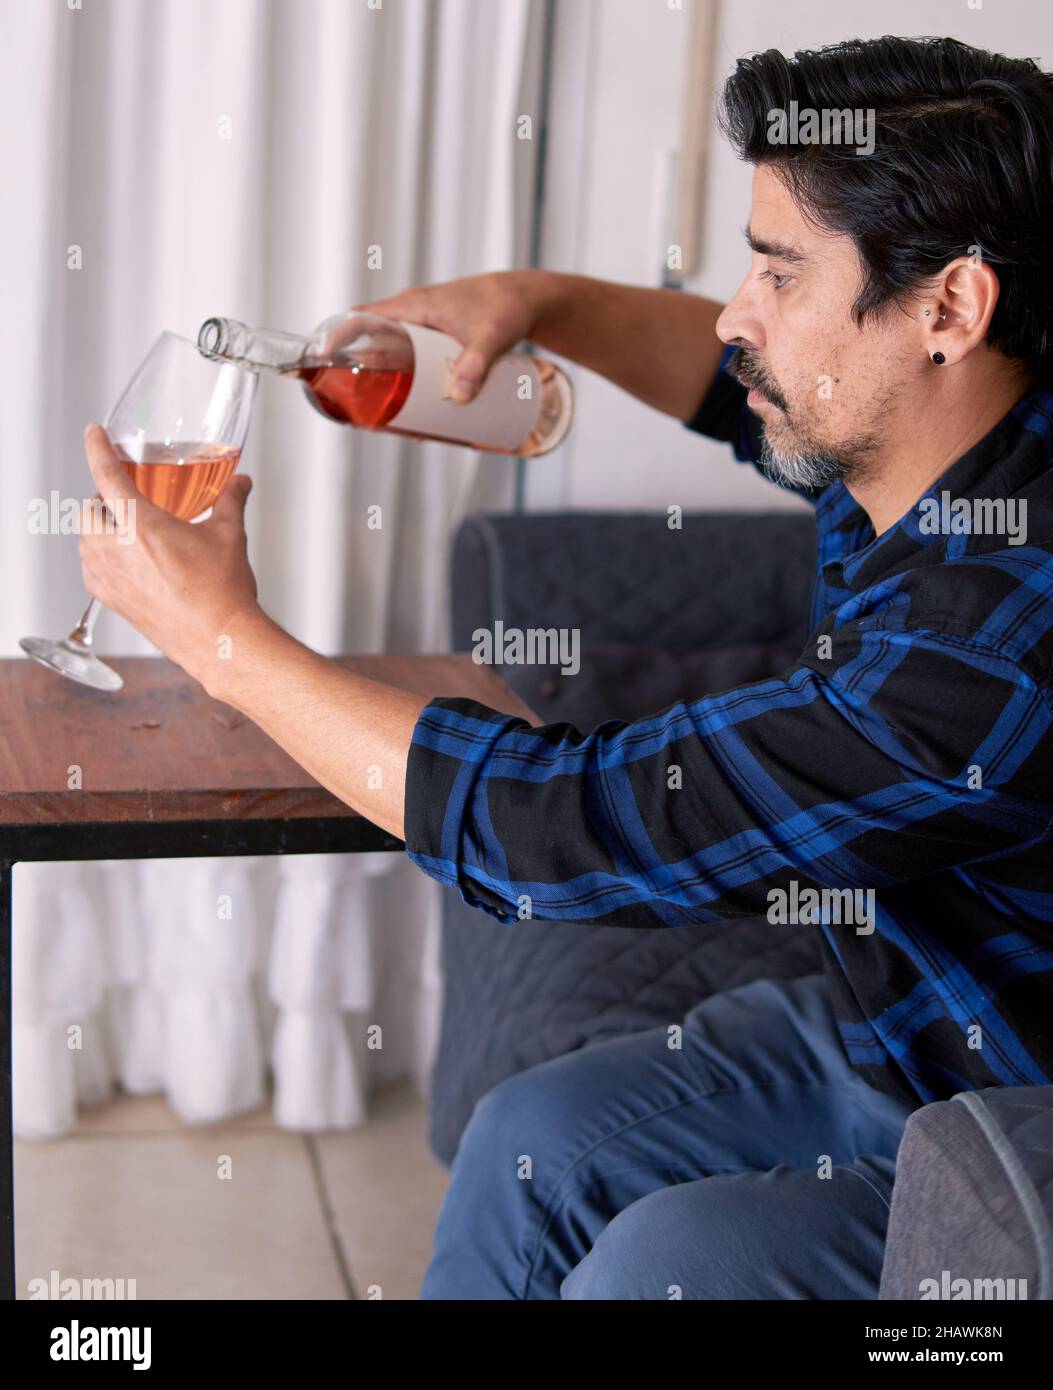 brunette latin man with shirt and beard pouring rose wine into a glass on a Table Wheel Sofa Side. White Curtain in background. Argentina. Vertical Stock Photo